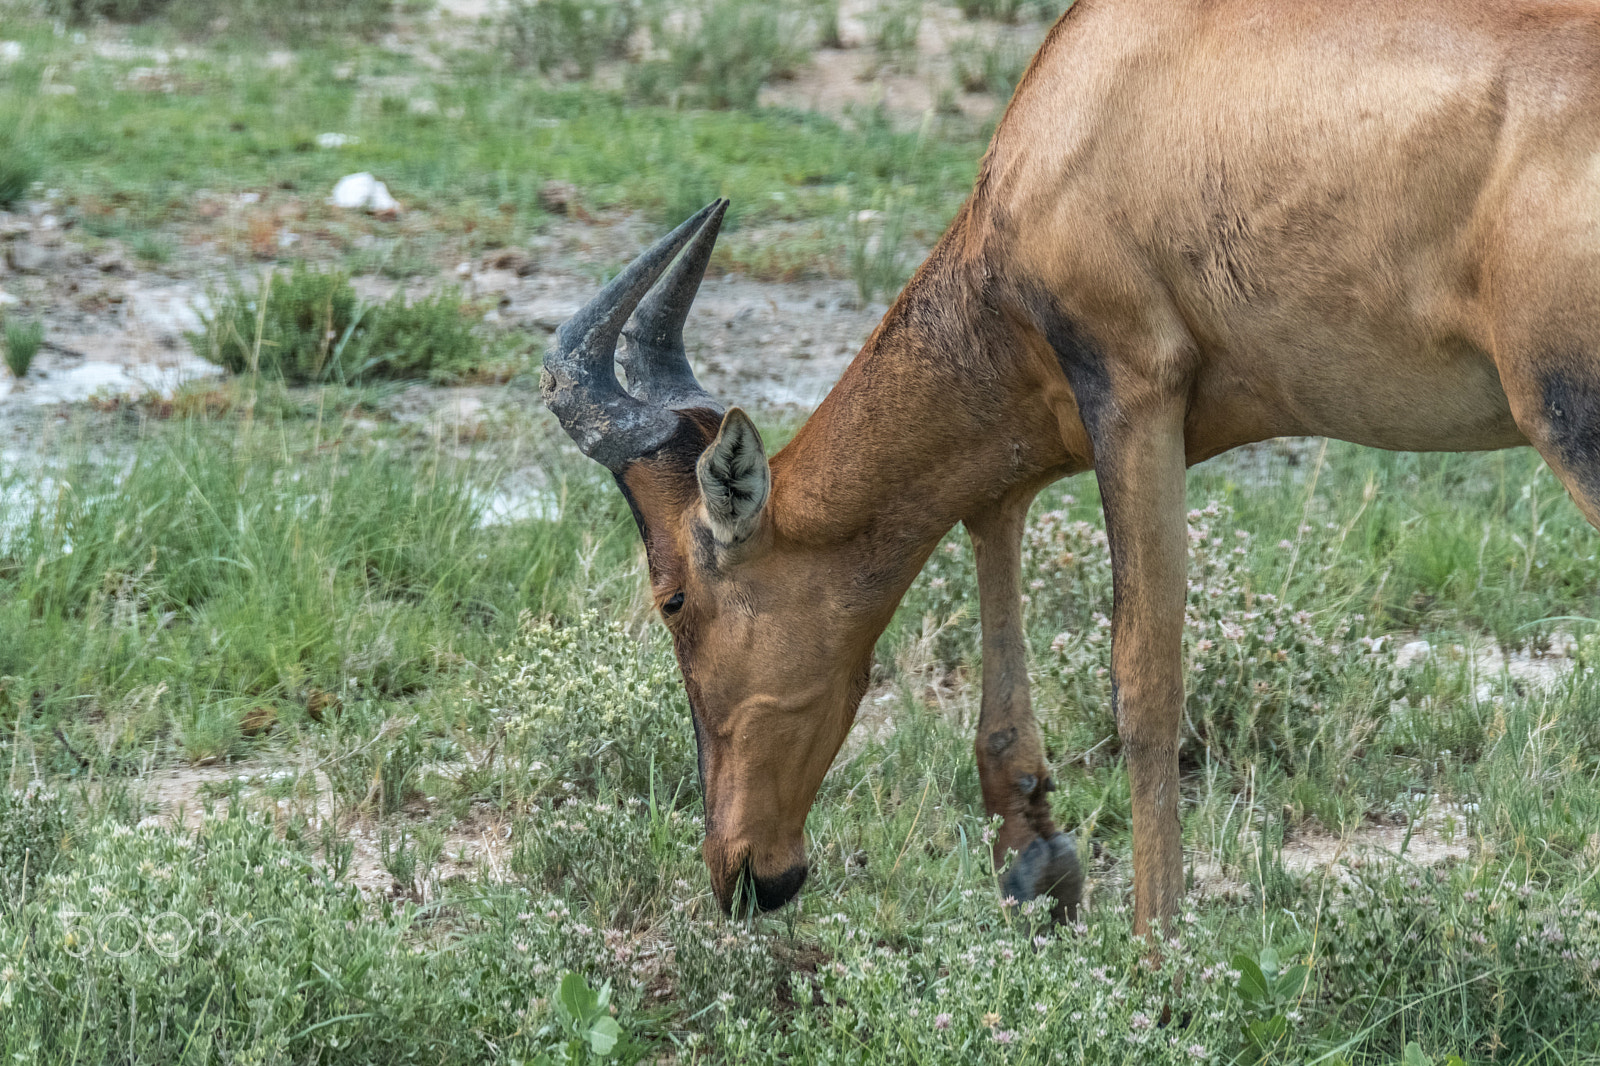 XF100-400mmF4.5-5.6 R LM OIS WR + 1.4x sample photo. Red hartebeest photography